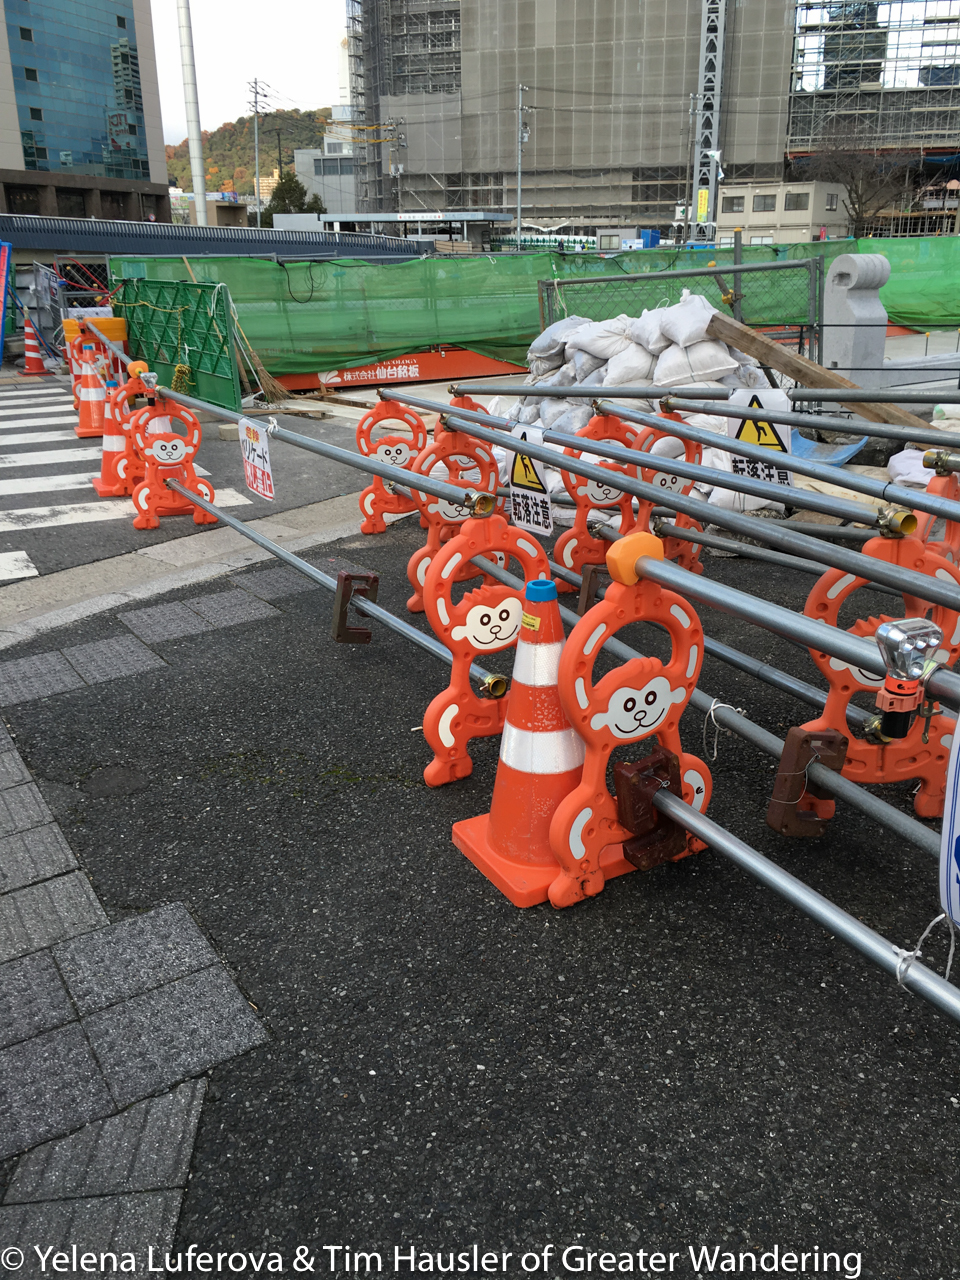 Hiroshima doesn't have hello kitty but they do have monkeys on the barricades